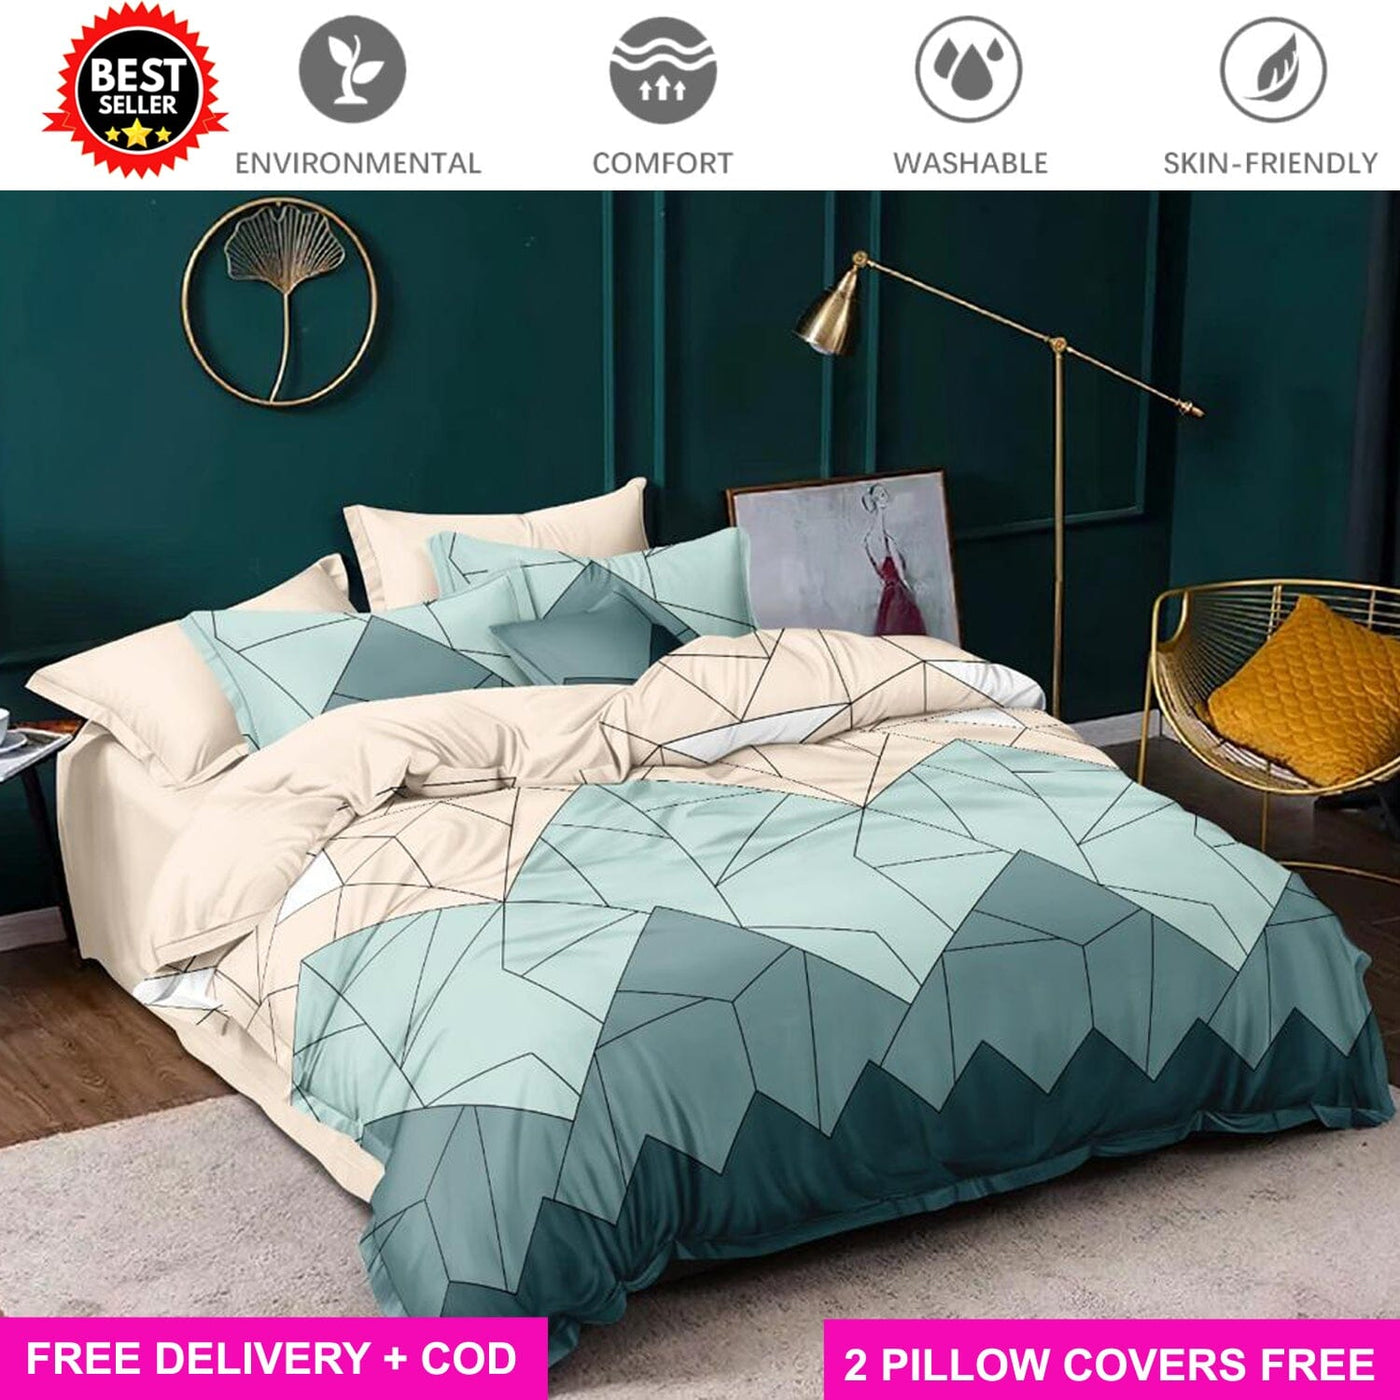 Green Shapes Full Elastic Fitted Bedsheet with 2 Pillow Covers - King Size Bed Sheets Great Happy IN 